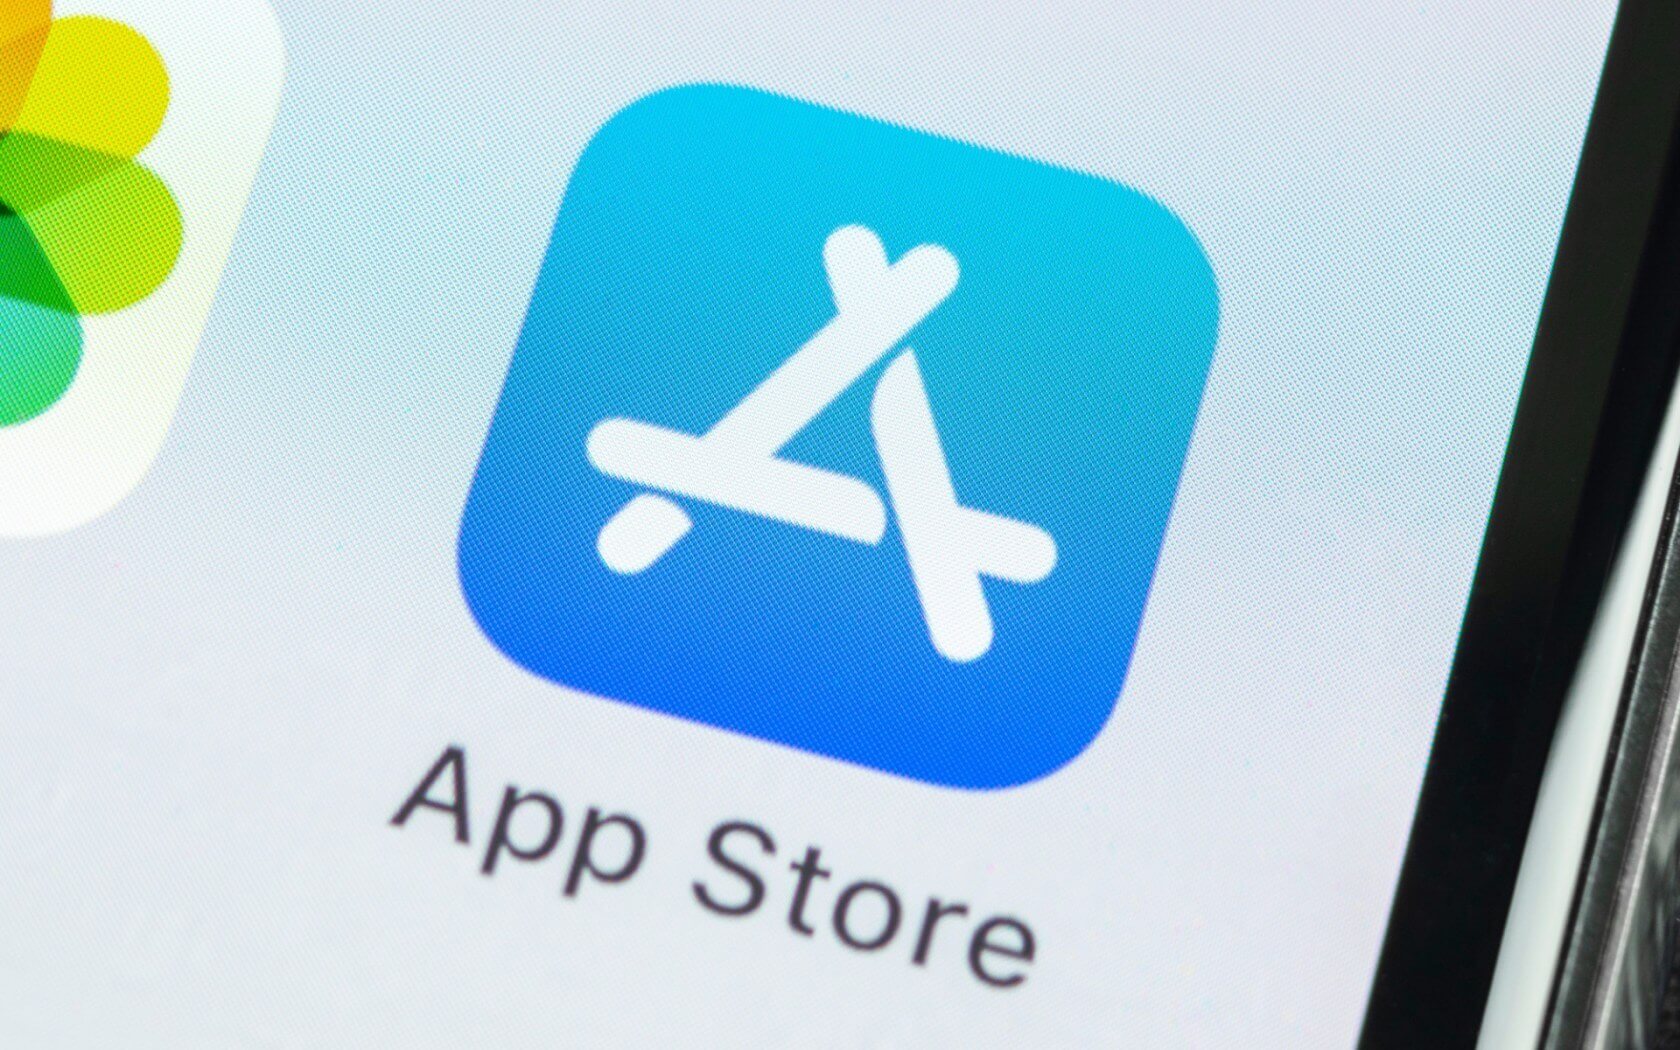 Apple is exploring the idea of allowing custom browser and email default apps in iOS 14